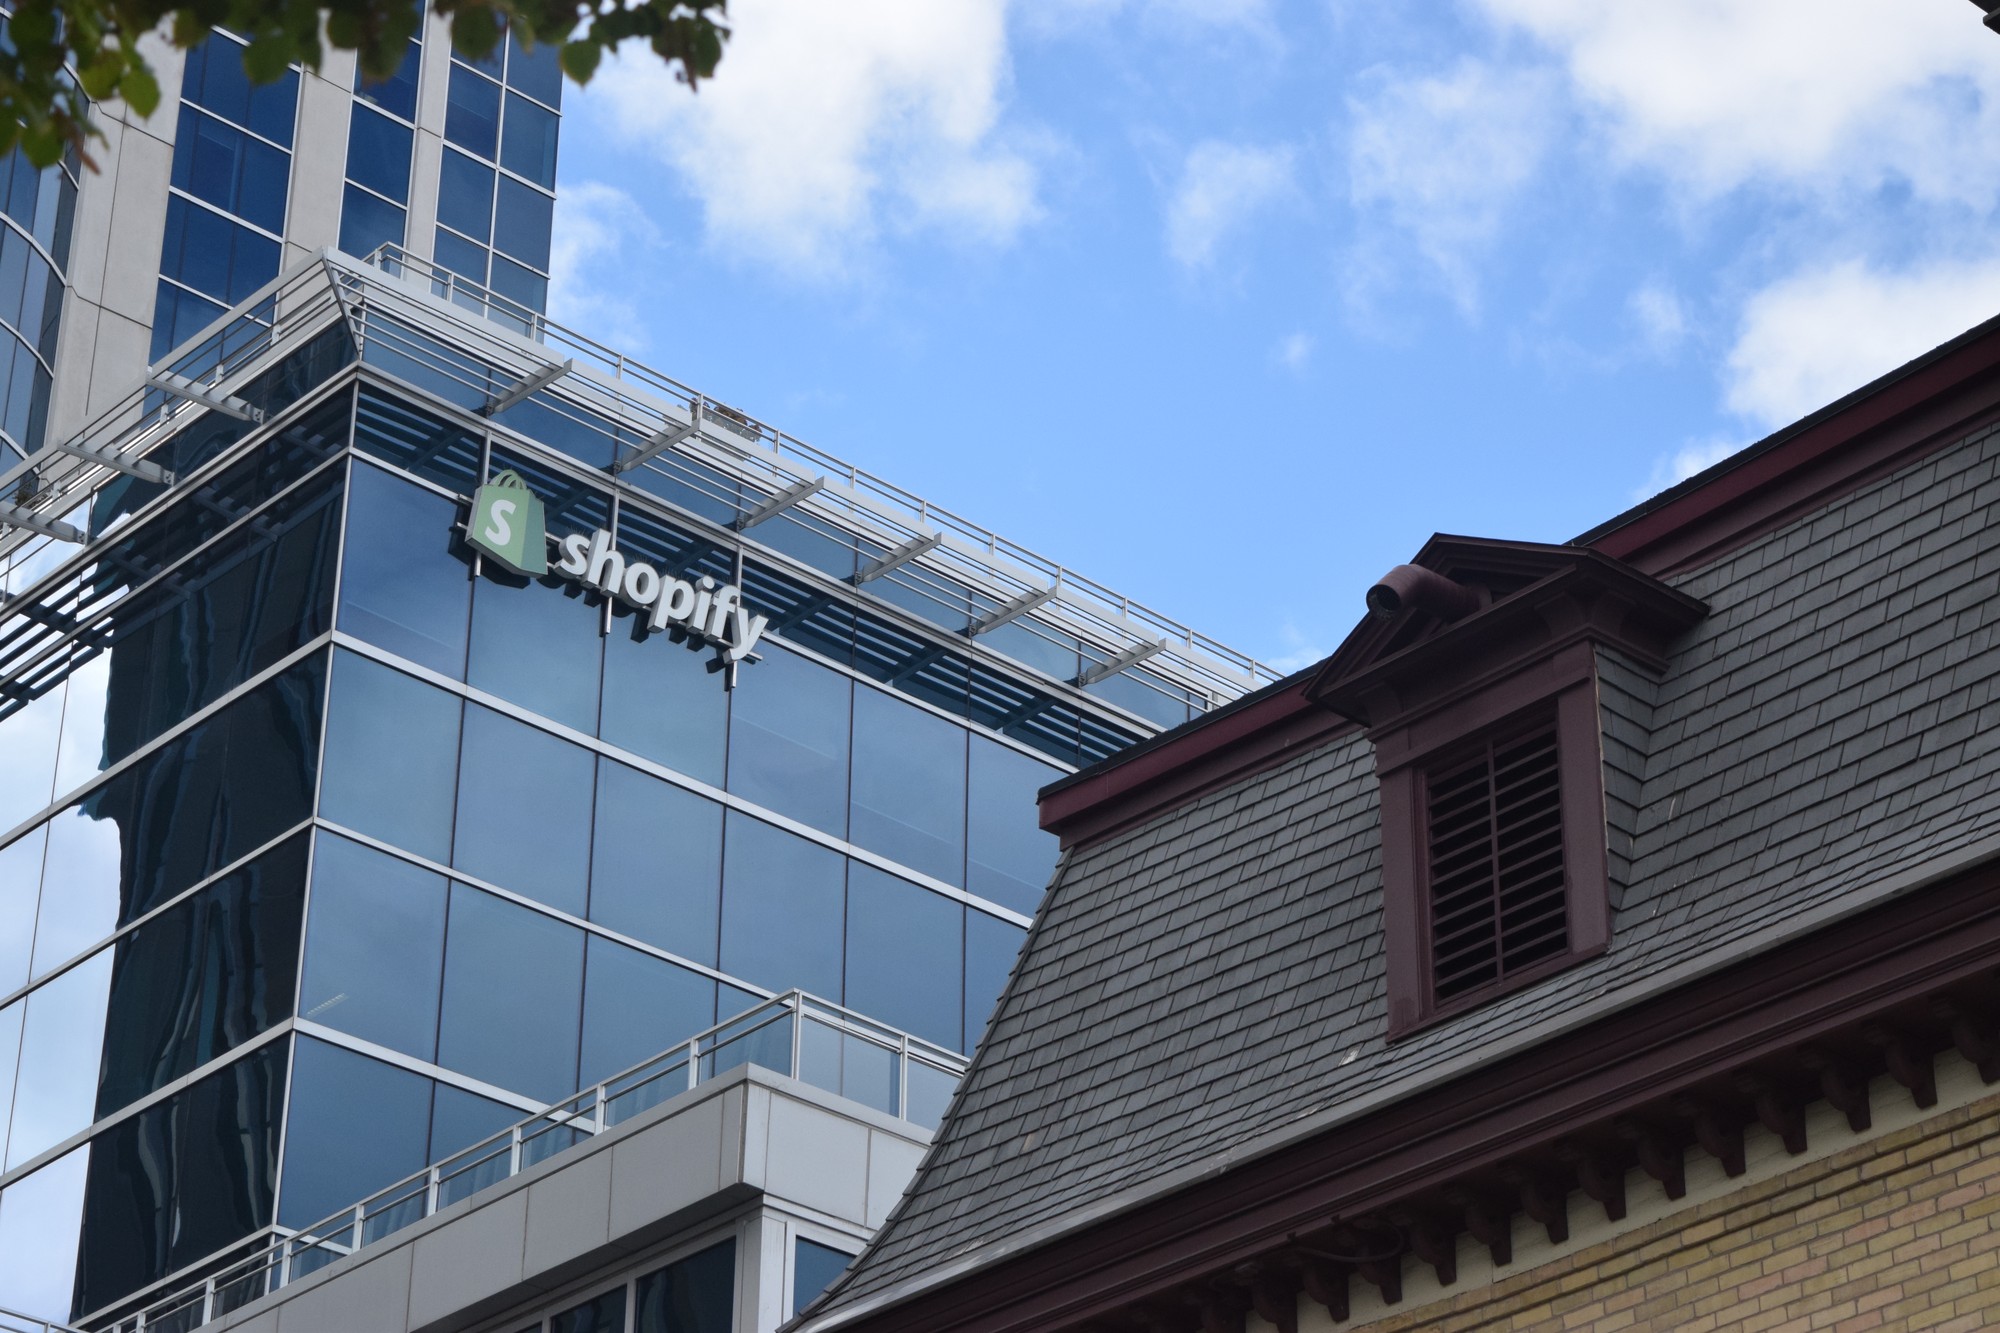 The former Shopify Ottawa headquarters is located on the corner of Elgin and Gloucester Street.